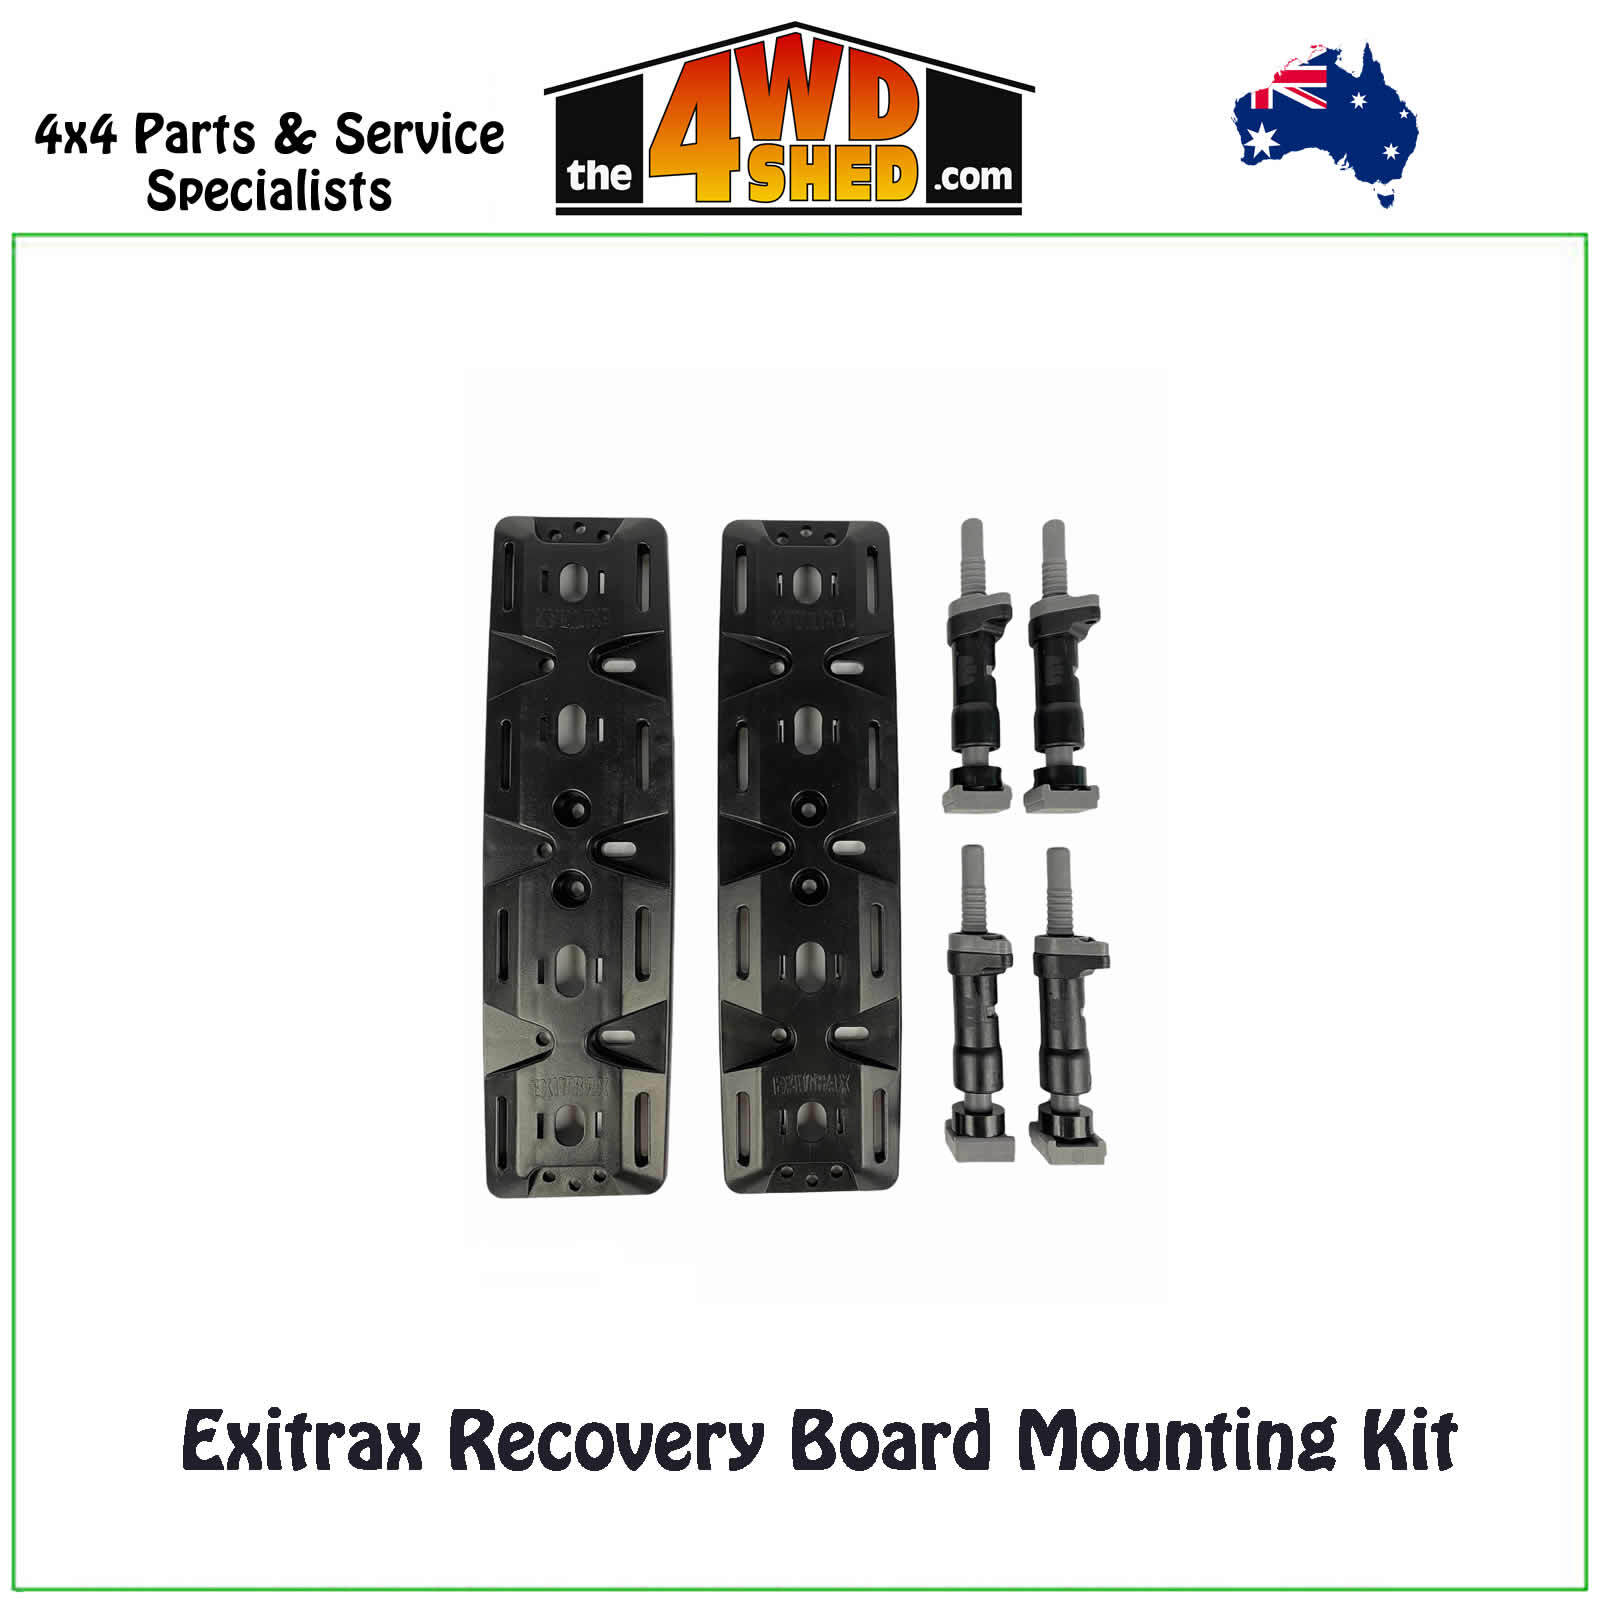 Exitrax Recovery Board Mounting Kit — 4x4 Down Under